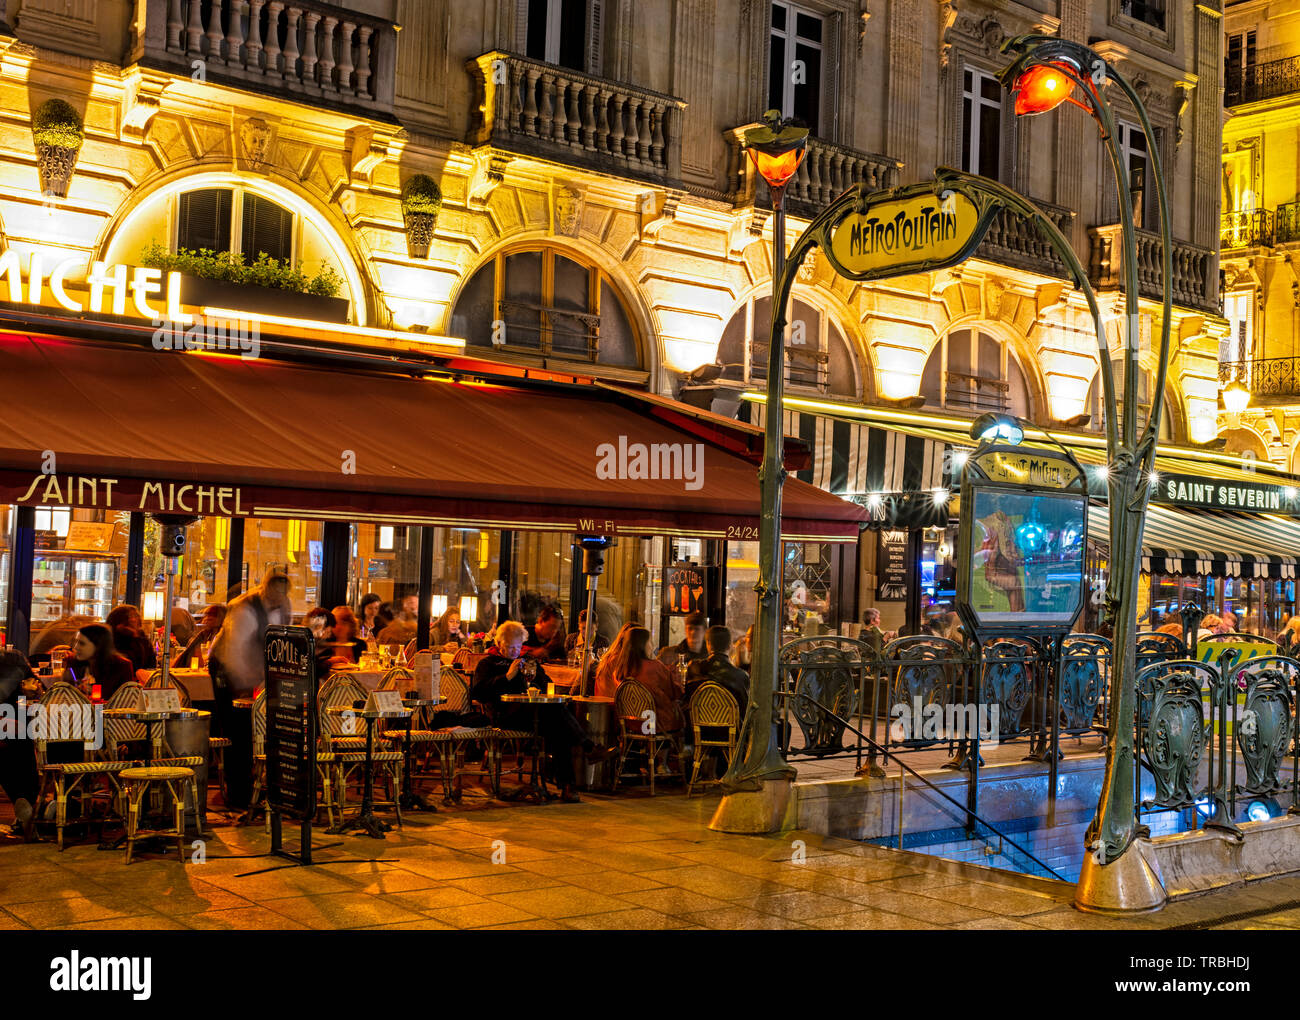 Entrance to the Metropolitain subway on Rue St. Michel in the evening with a view of restaurants and people dining outdoors. Stock Photo